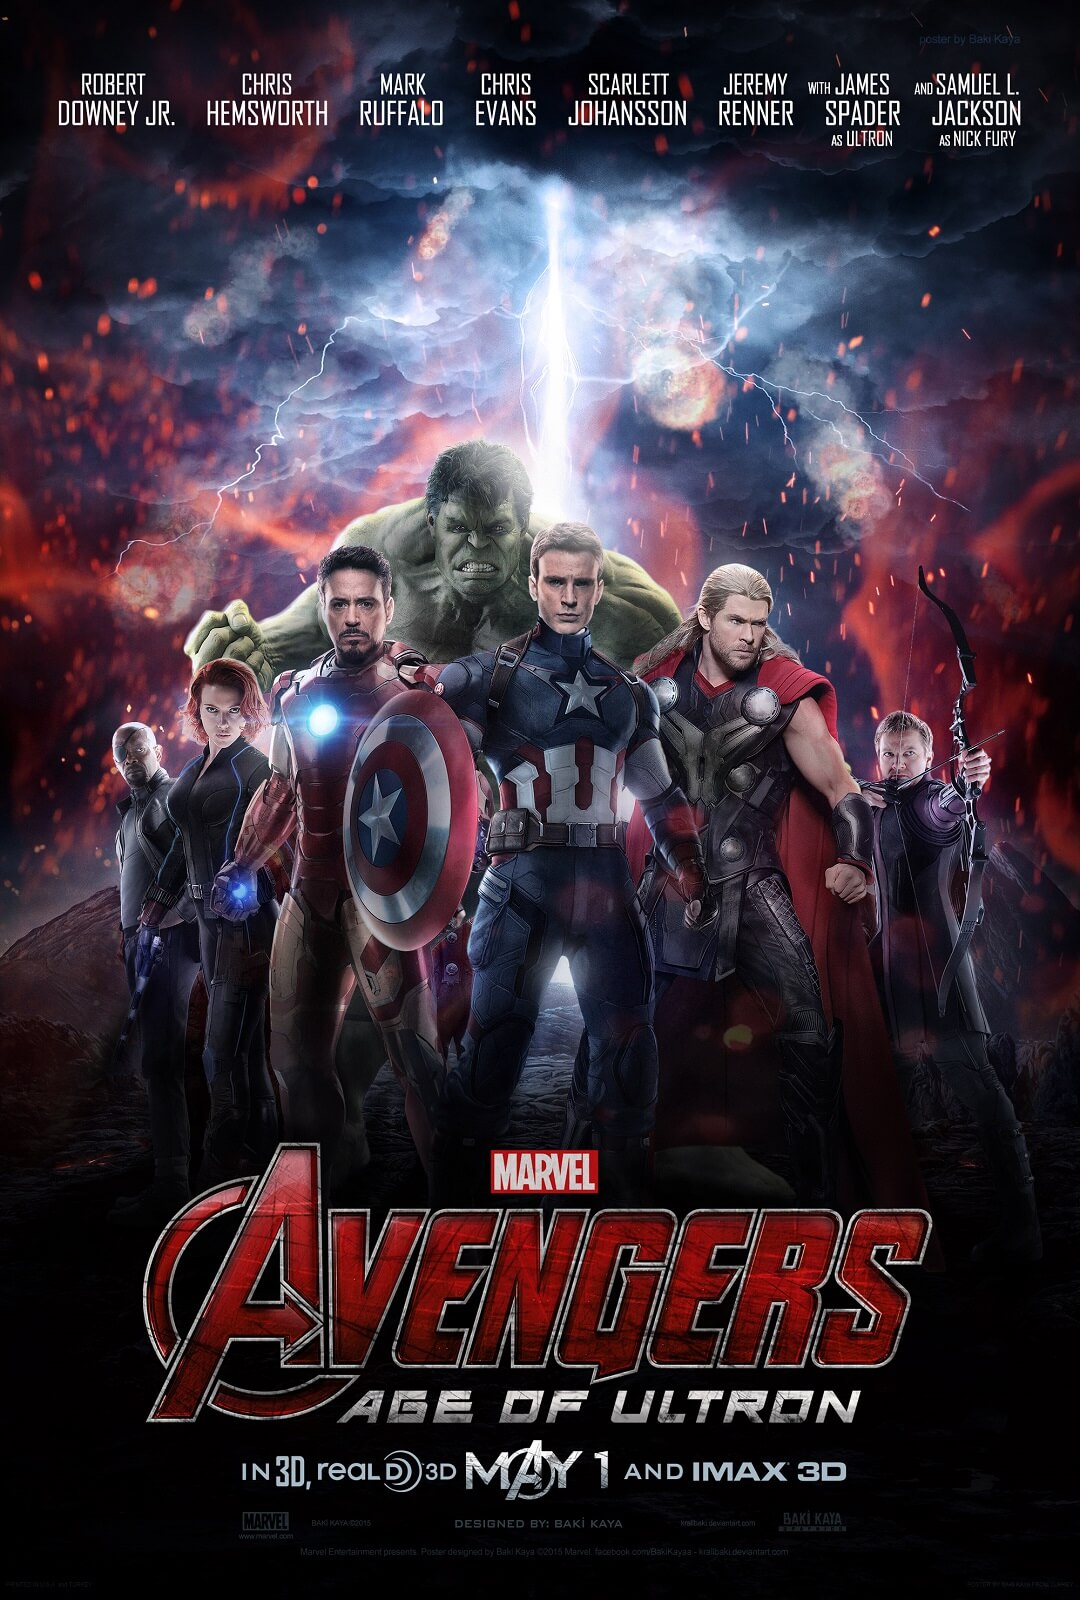 Download Avengers: Age of Ultron (2015) (Dual Audio) Blu-Ray Movie in 480p, 720p, 1080p - Techoffical